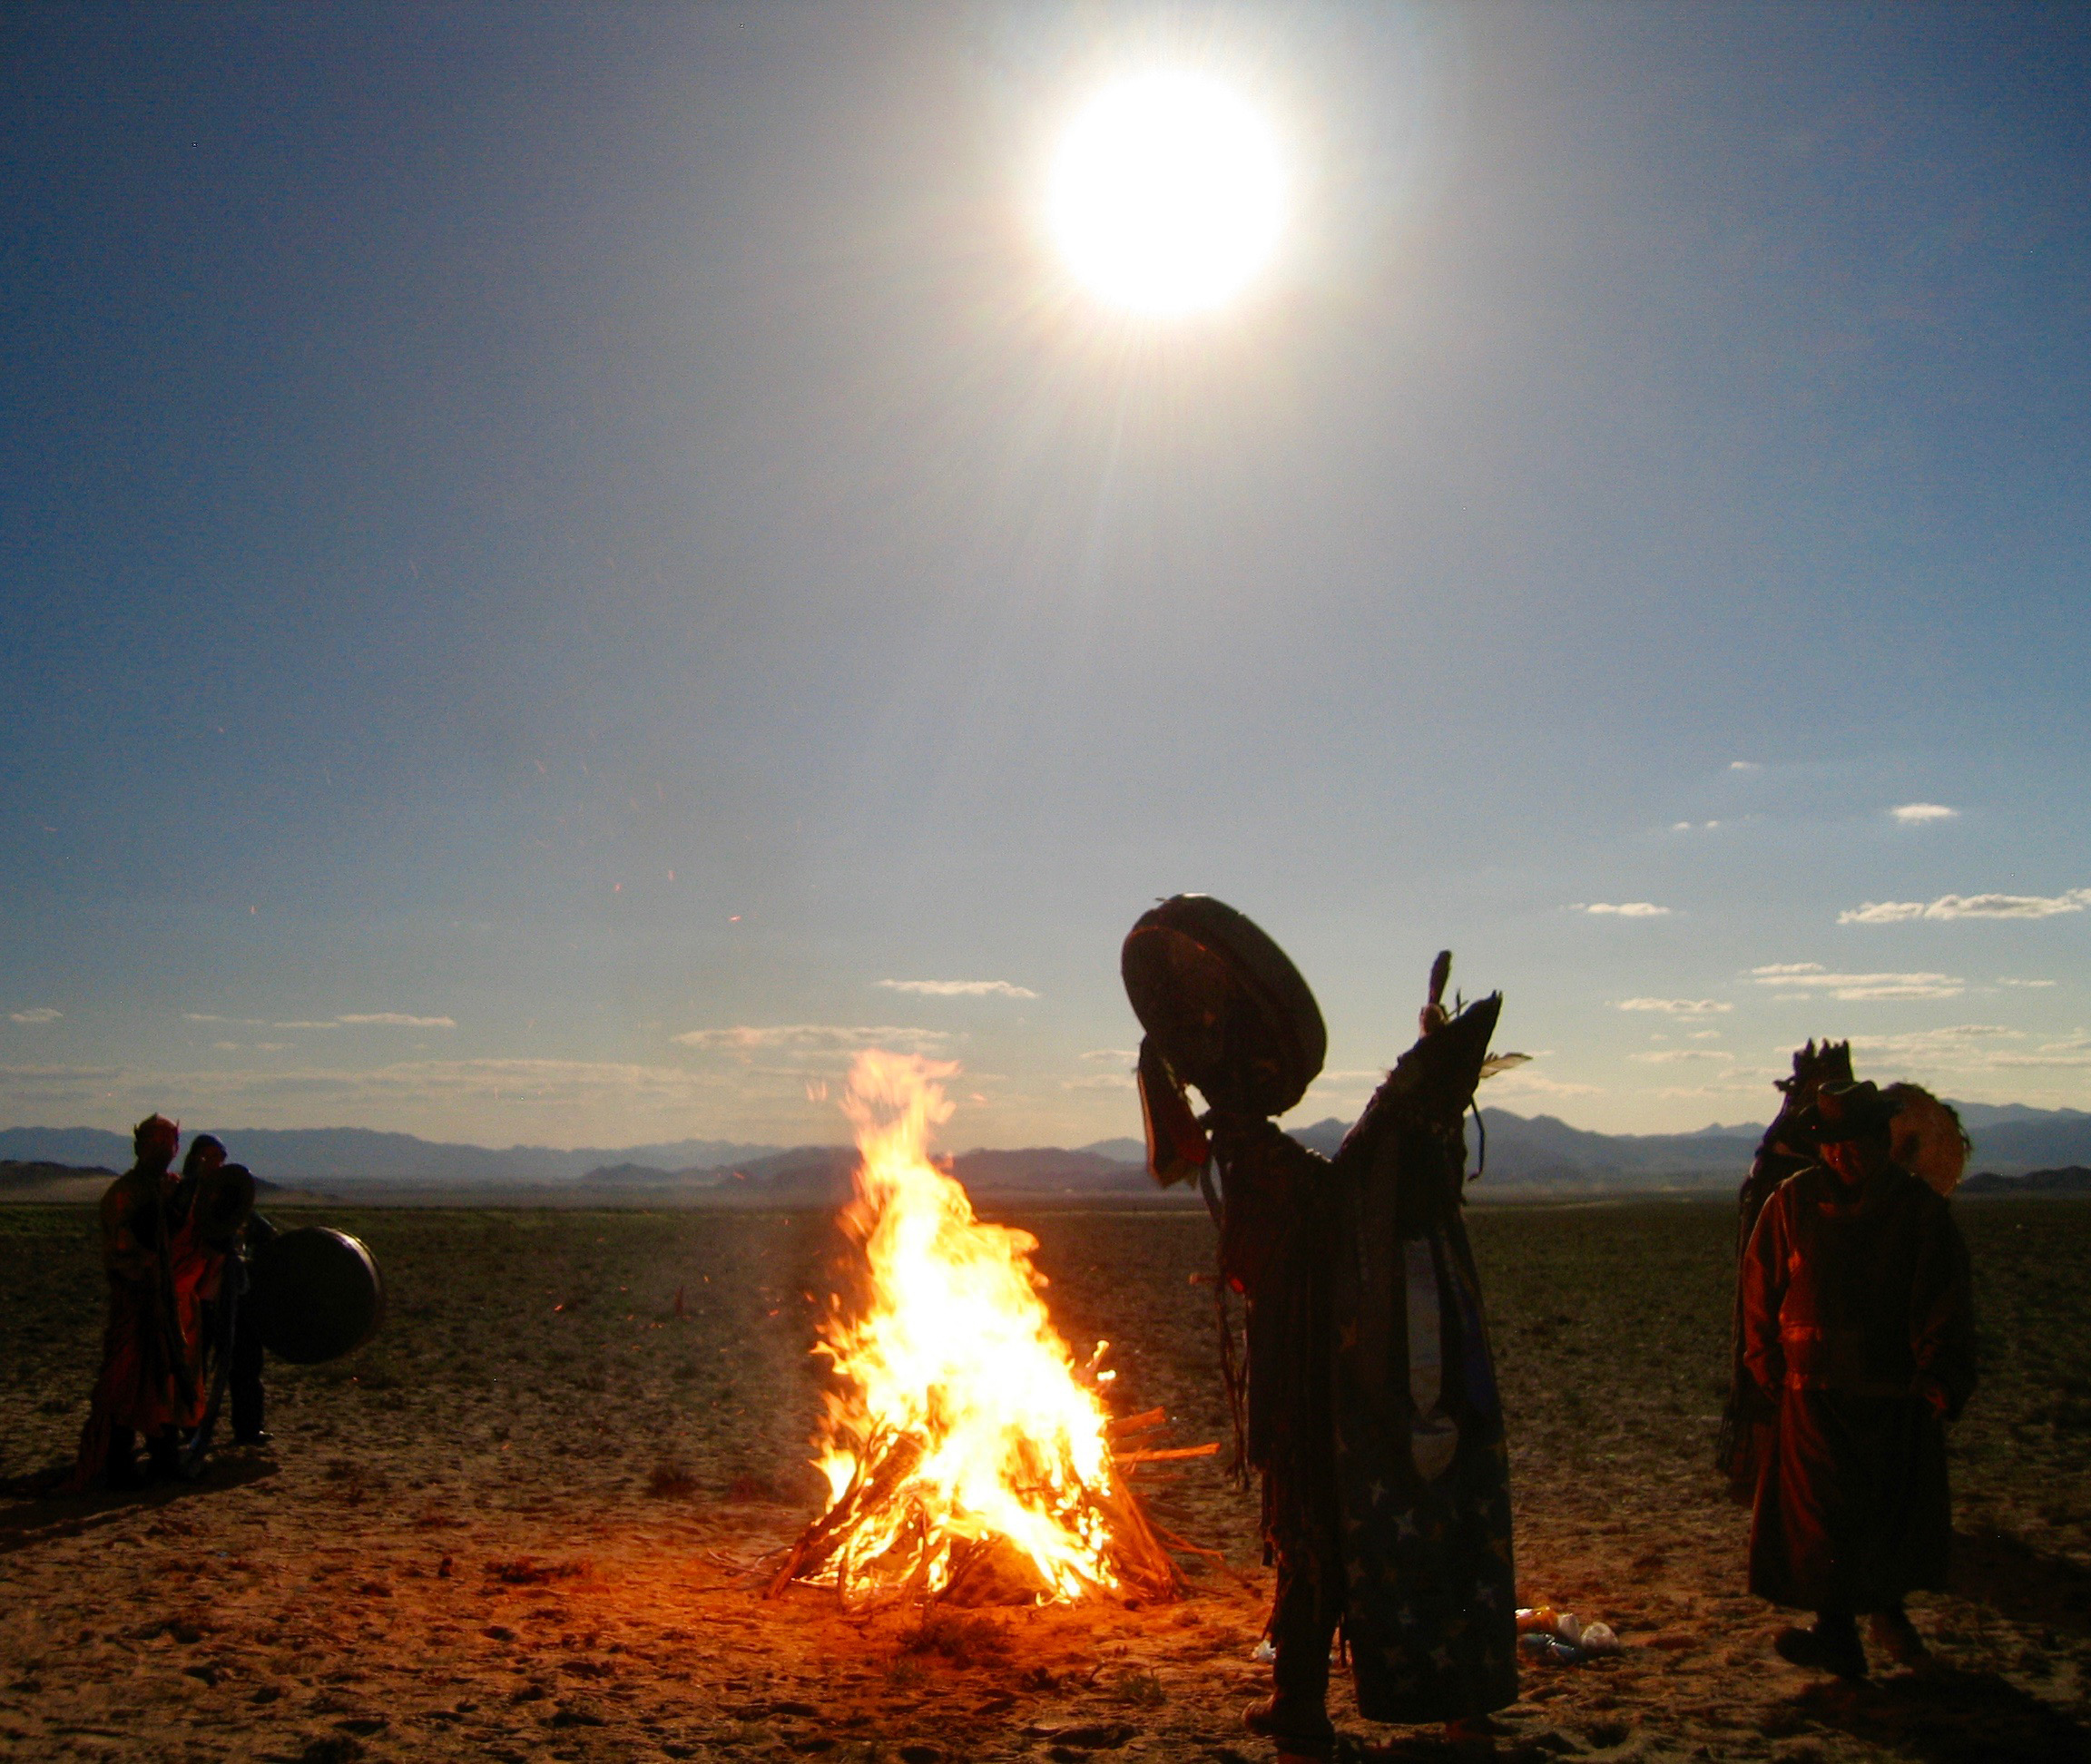 A Shaman ceremony during a total solar eclipse in Mongolia where Ray Jayawardhana, astrophysicist and Dean of the Faculty of Science, was to watch the event